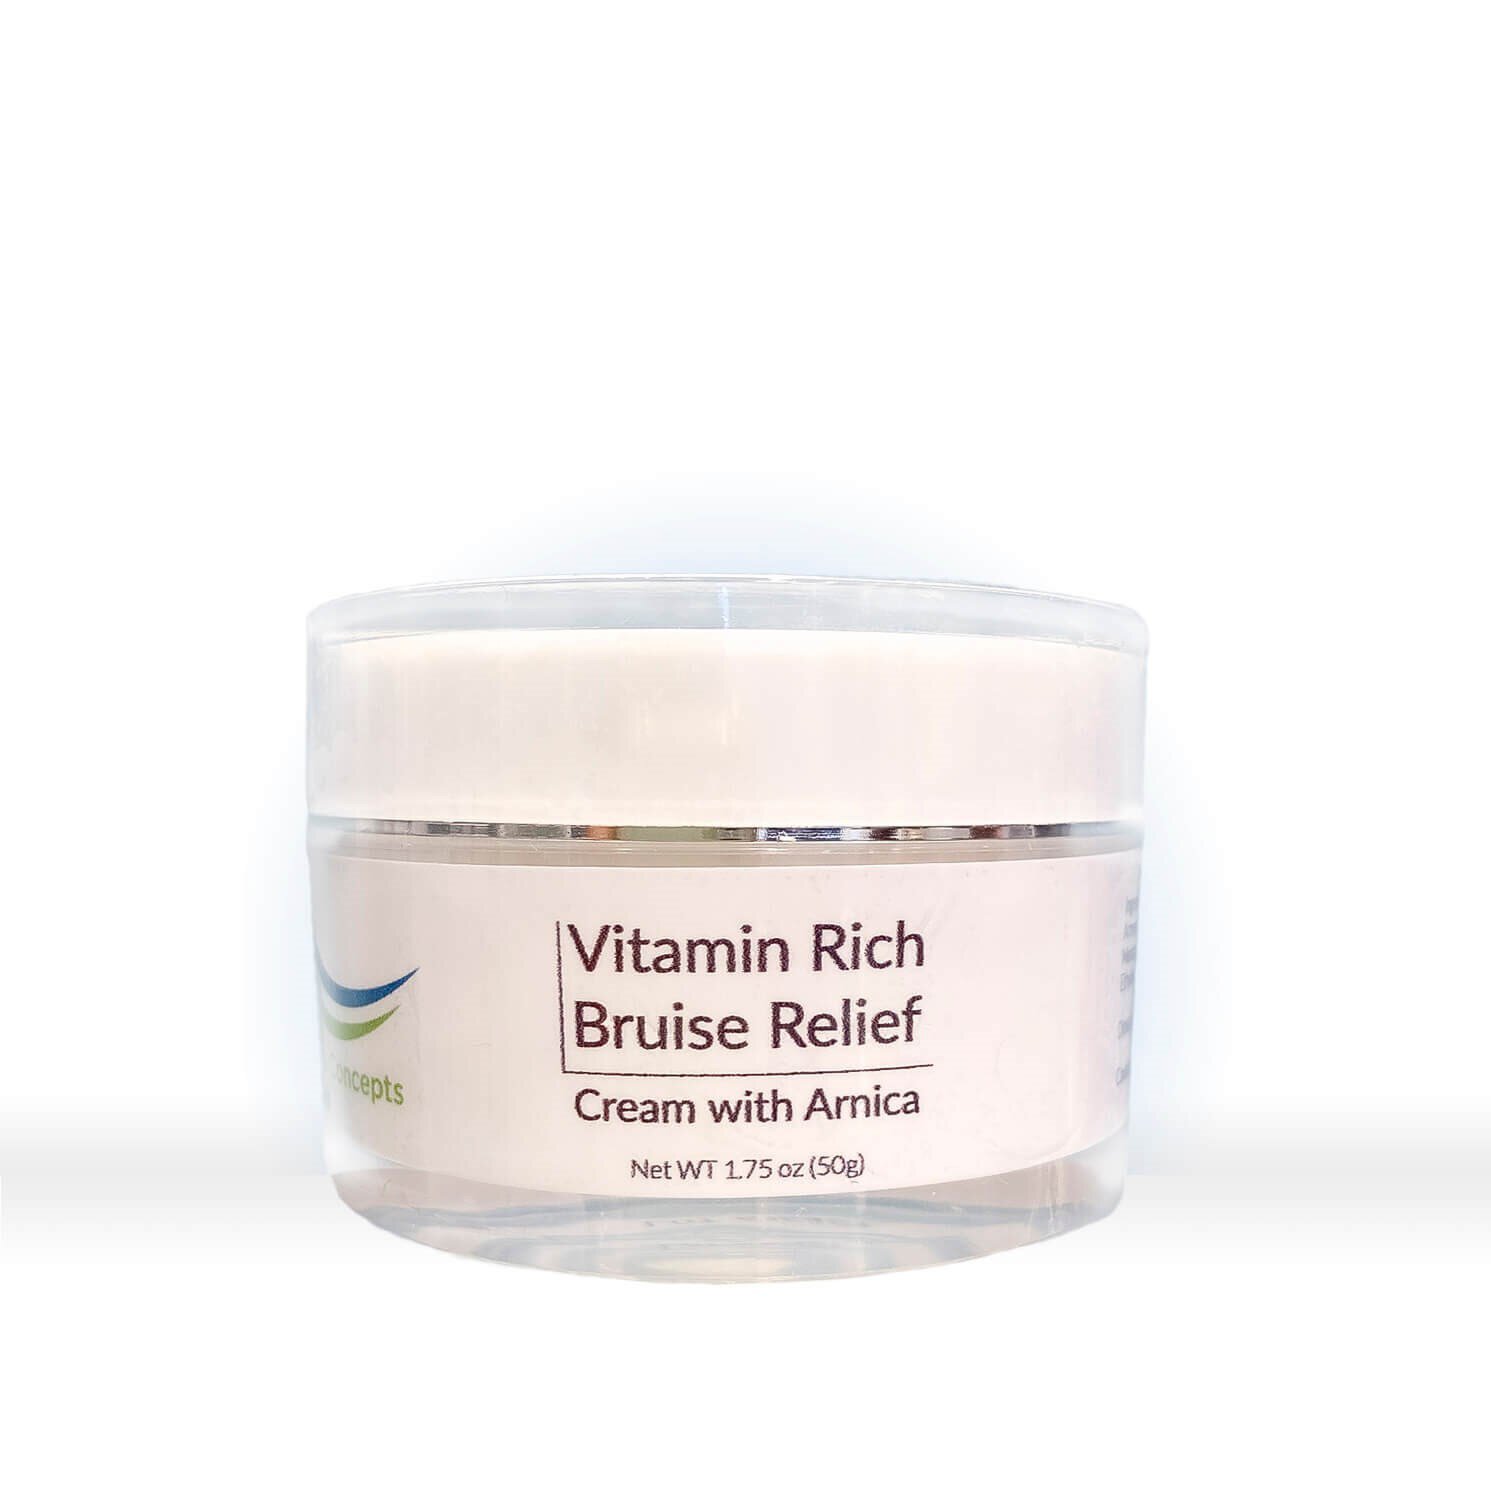 Vitamin Rich Bruise Relief product